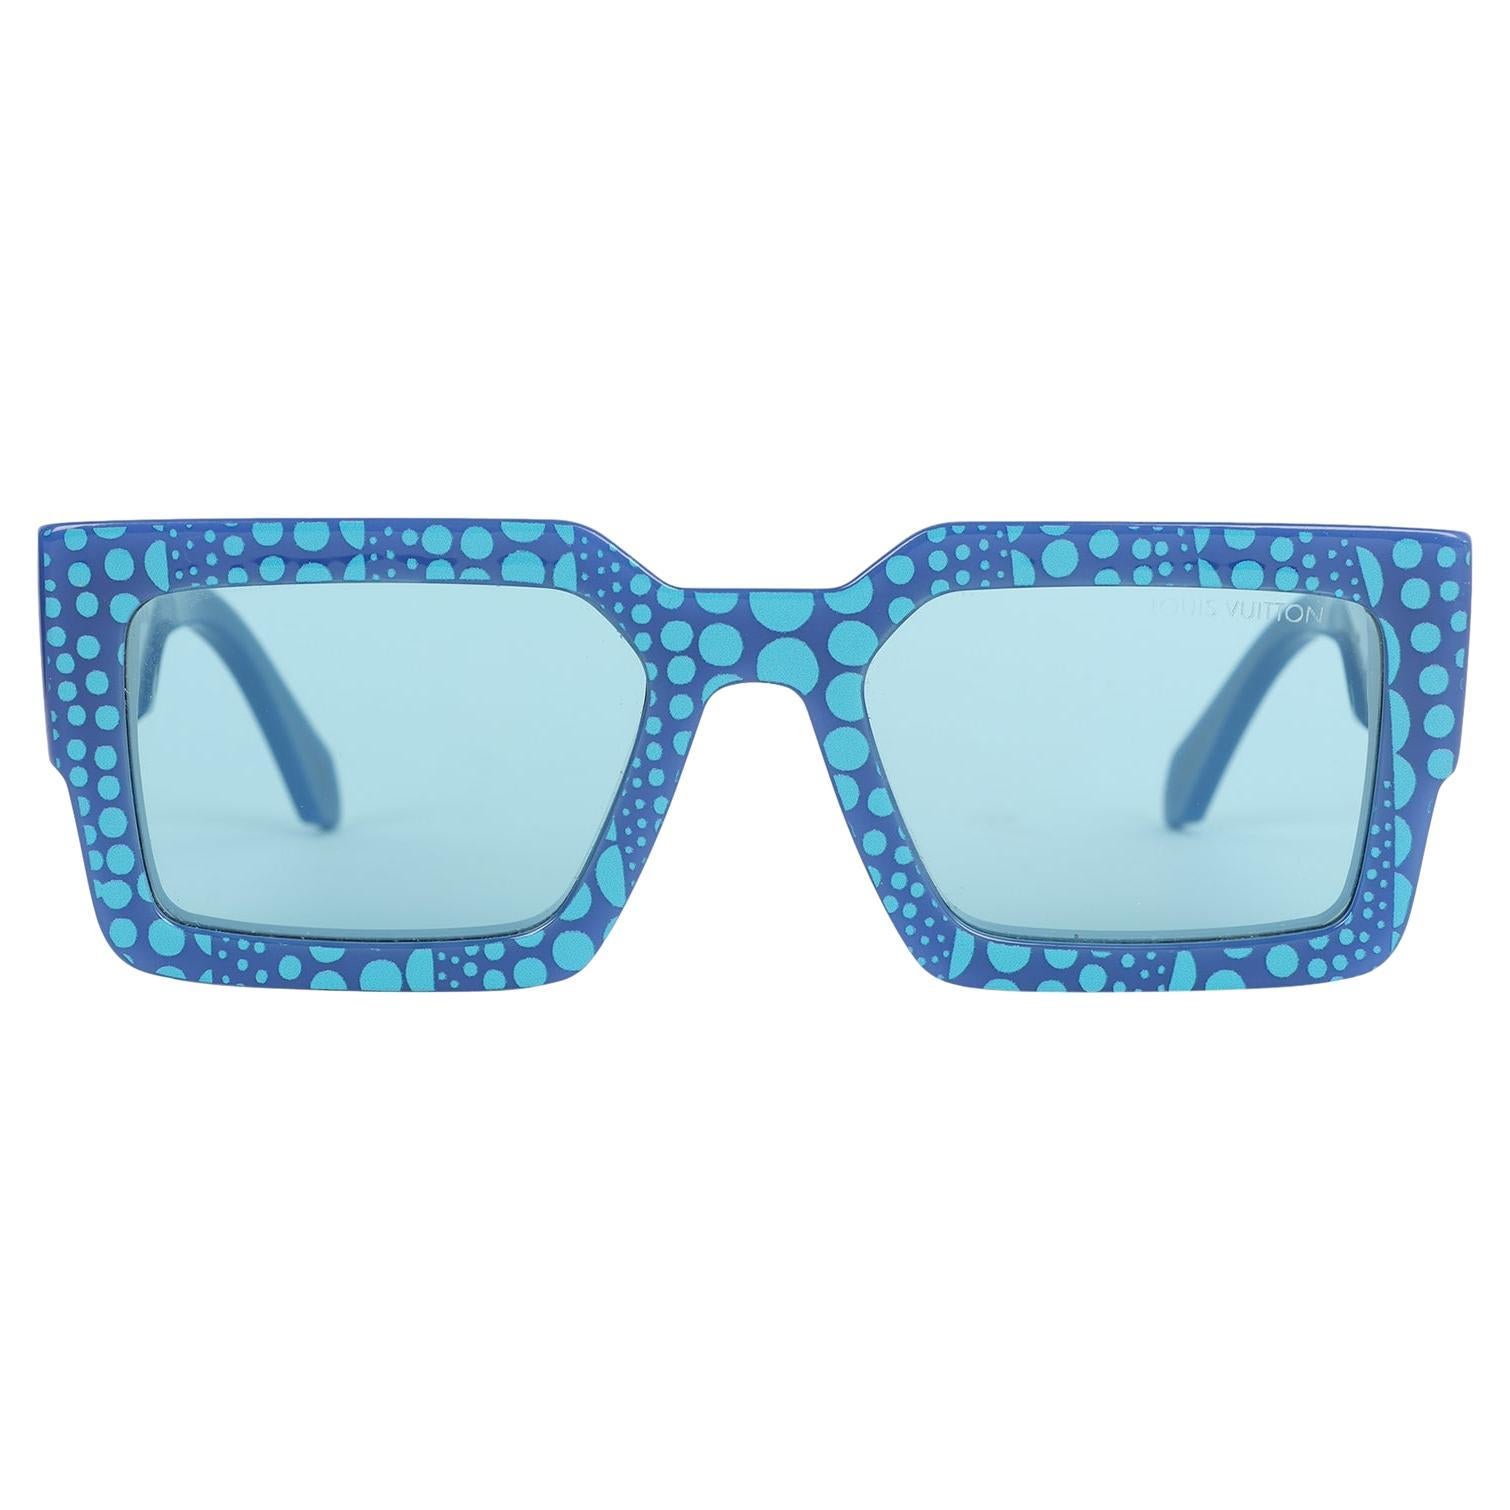 Authentic, pre-loved Louis Vuitton X Yayoi Kusama Clash Pumpkin Sunglasses.  Features, acetate material, blue colors, silver tone hardware, LV on the side of the arms. Released in 2023

5.85